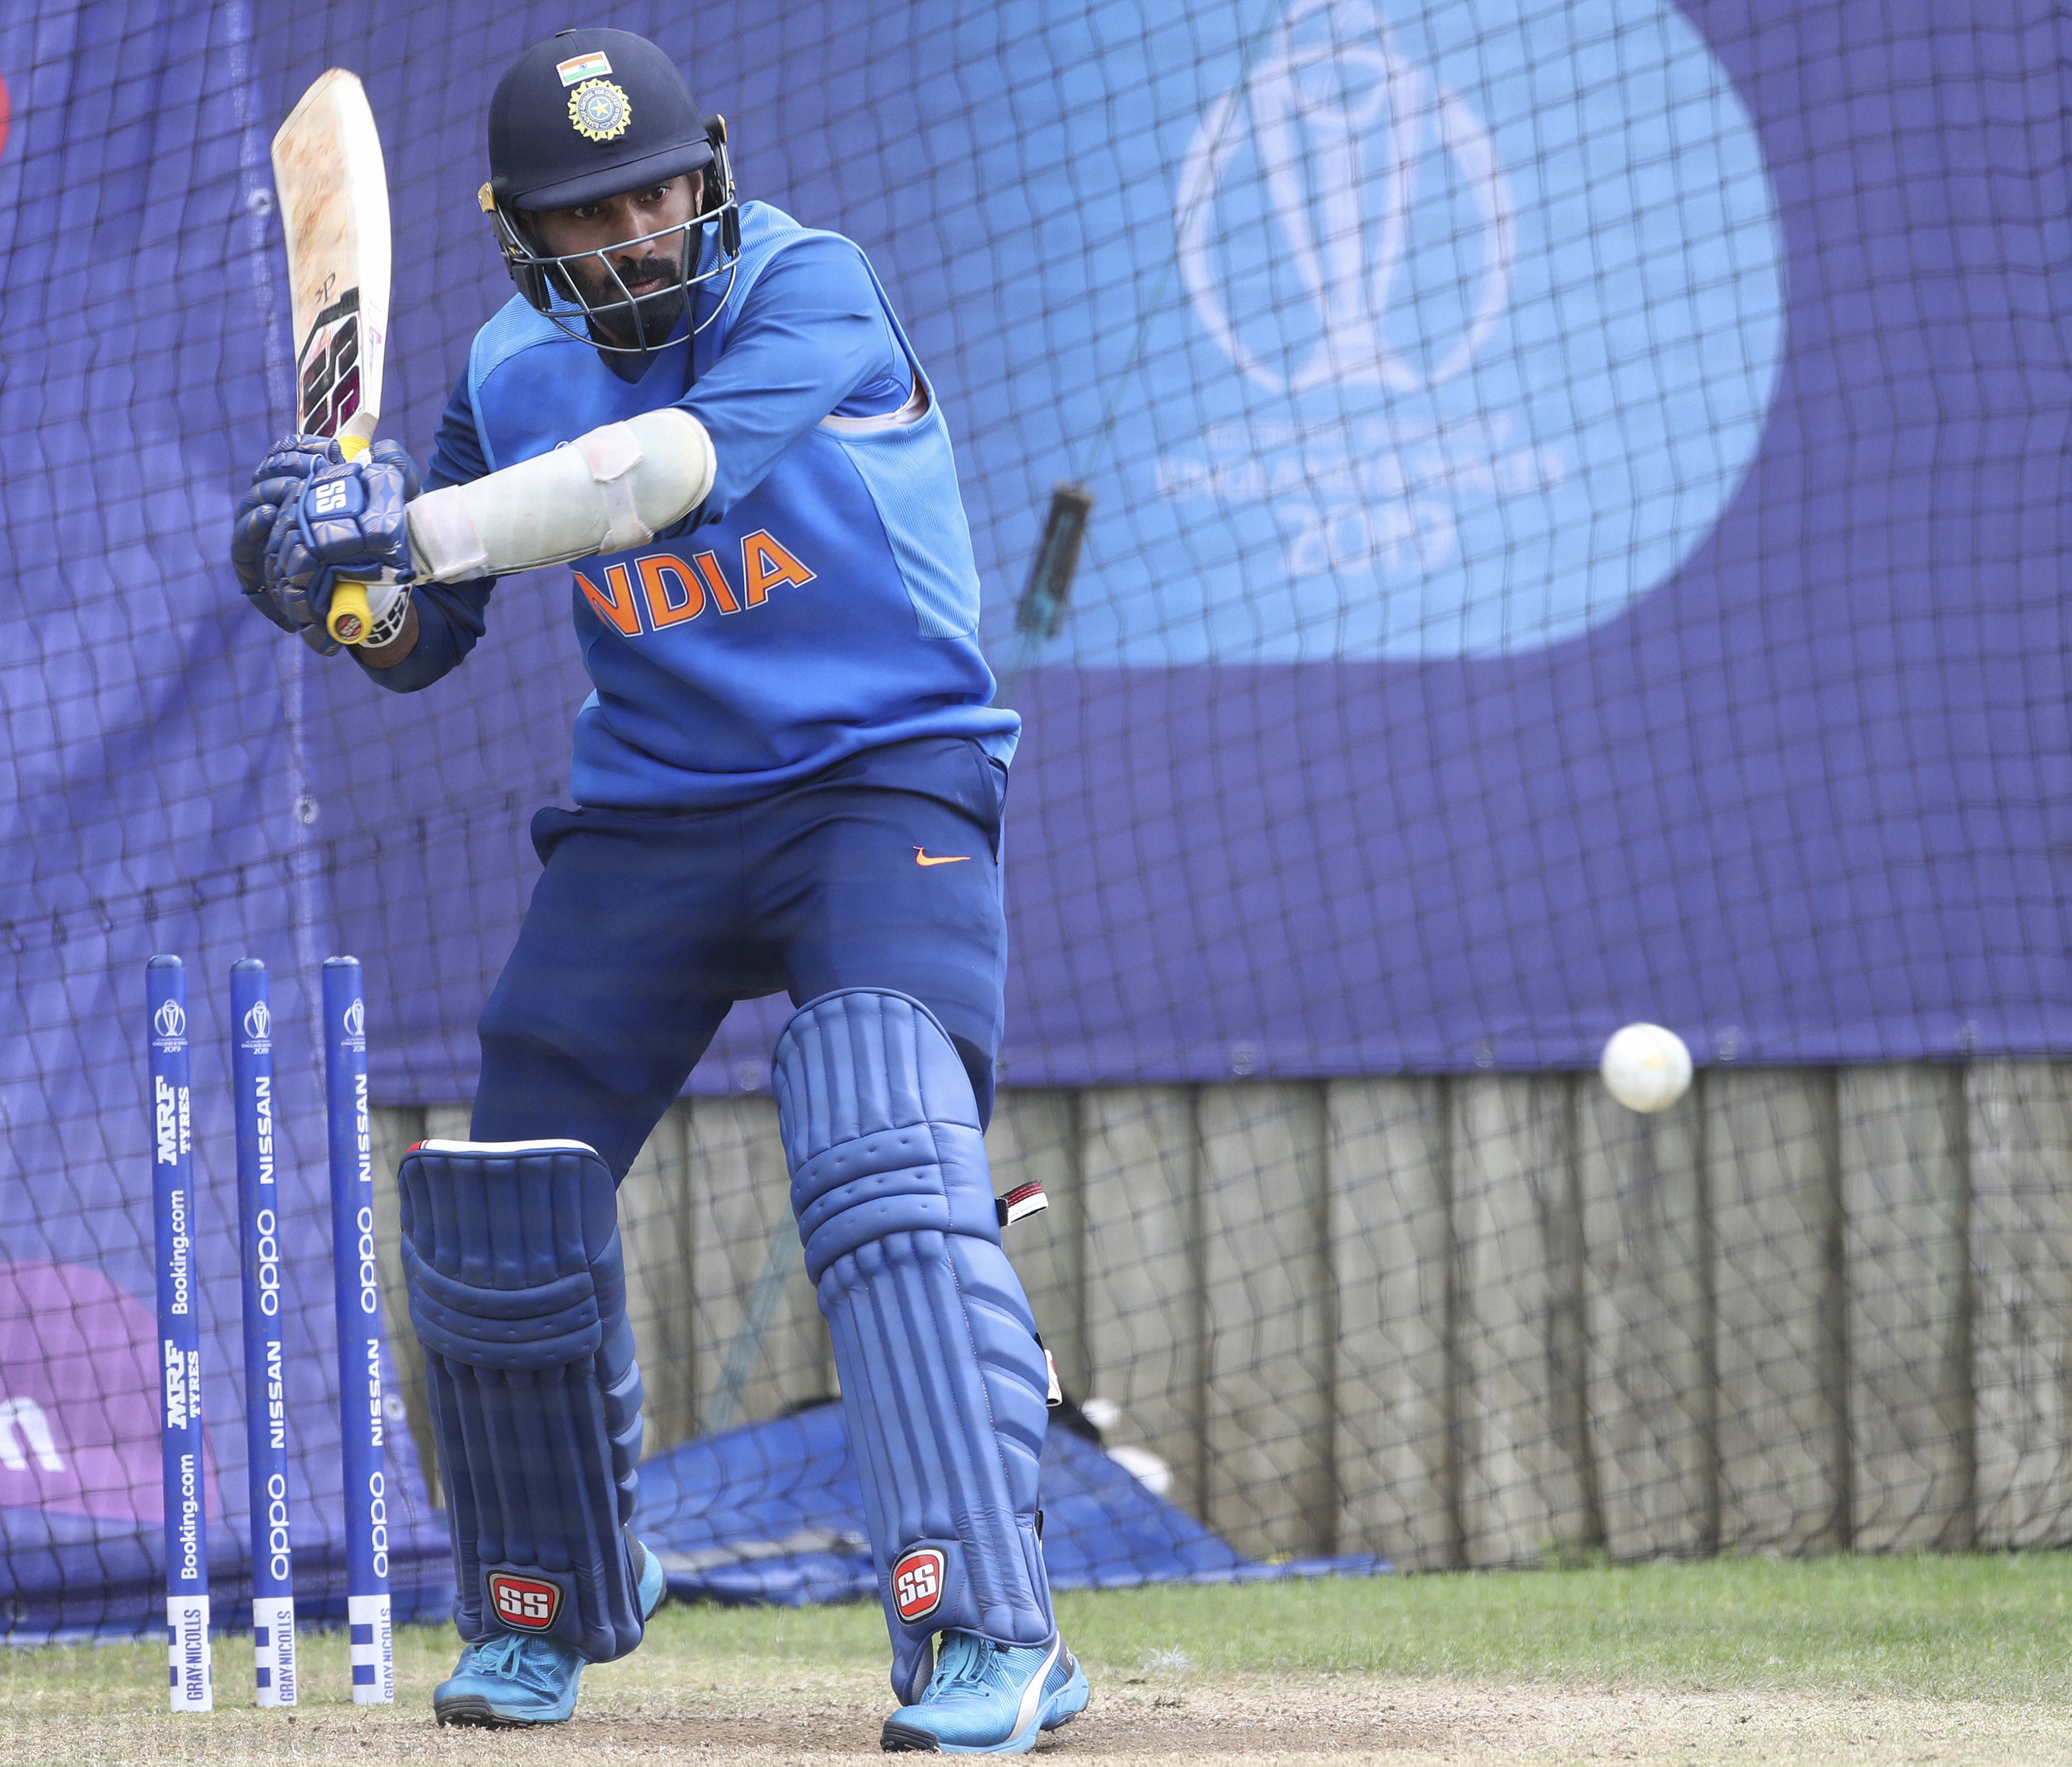 India's Dinesh Karthik bats in the nets during a training session ahead of their Cricket World Cup match against South Africa at Ageas Bowl in Southampton - PTI